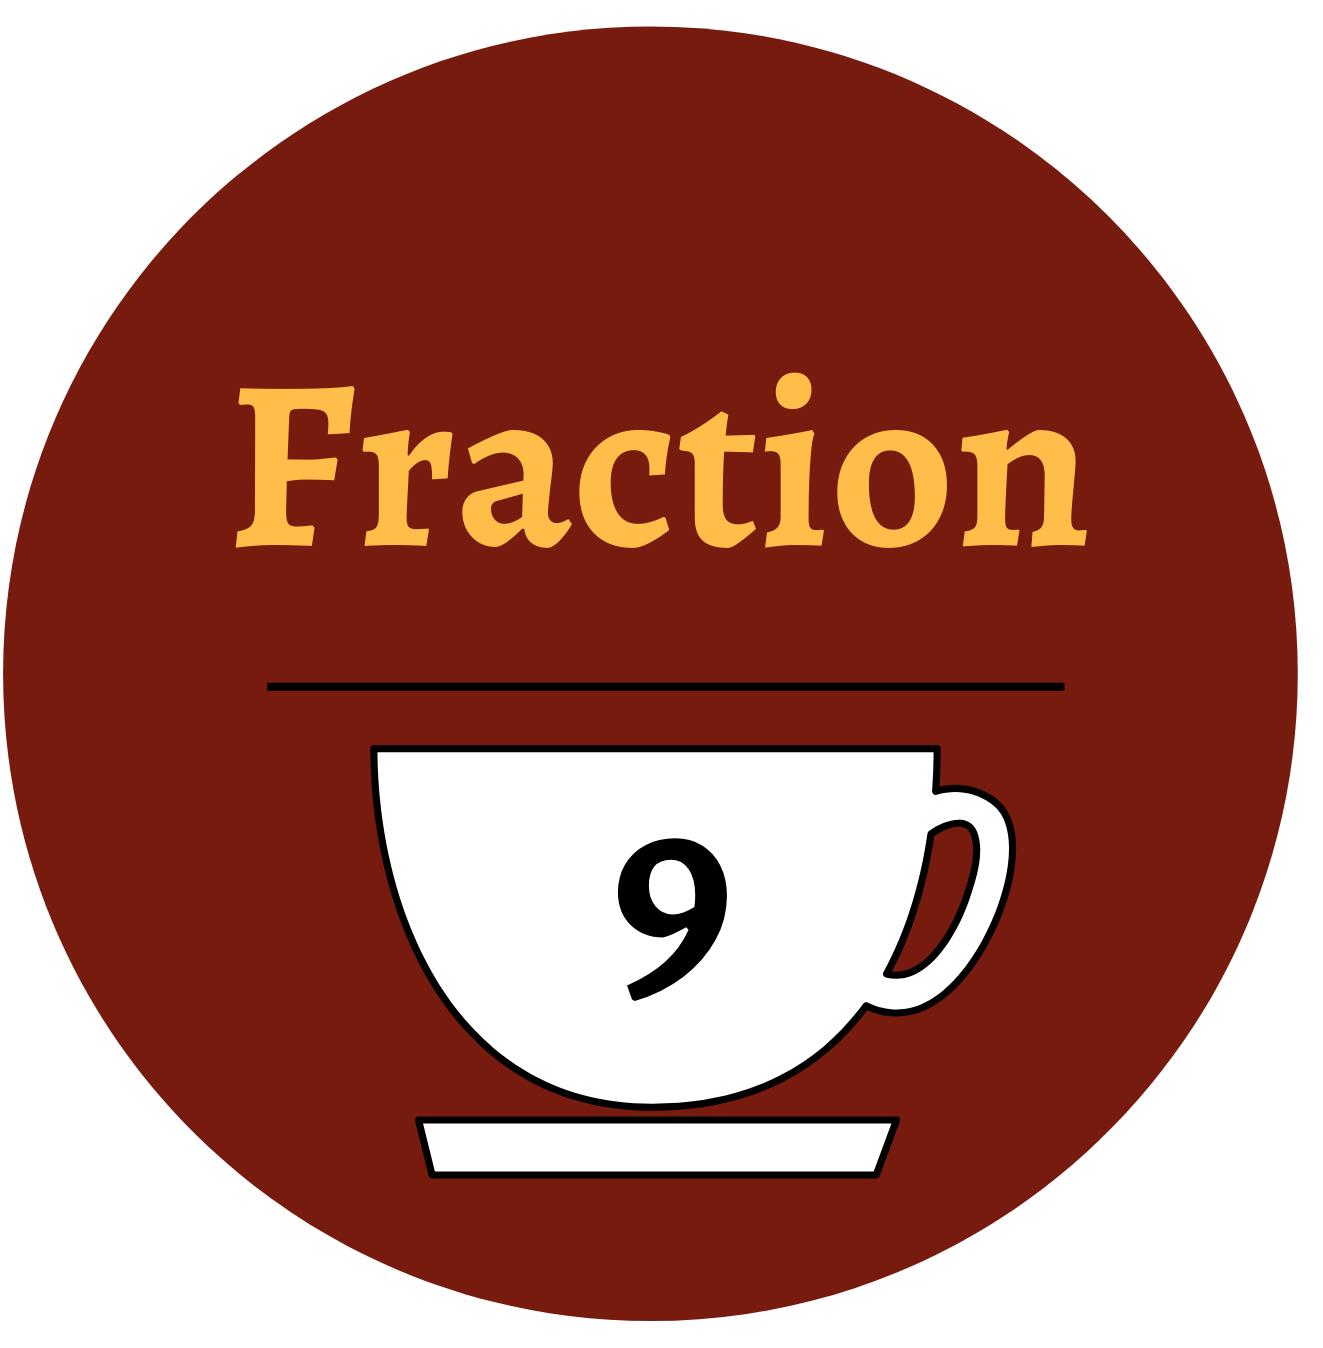 Fraction 9 Coffee Roasters: Fraction 9 Coffee. Premium Filter Coffee ...